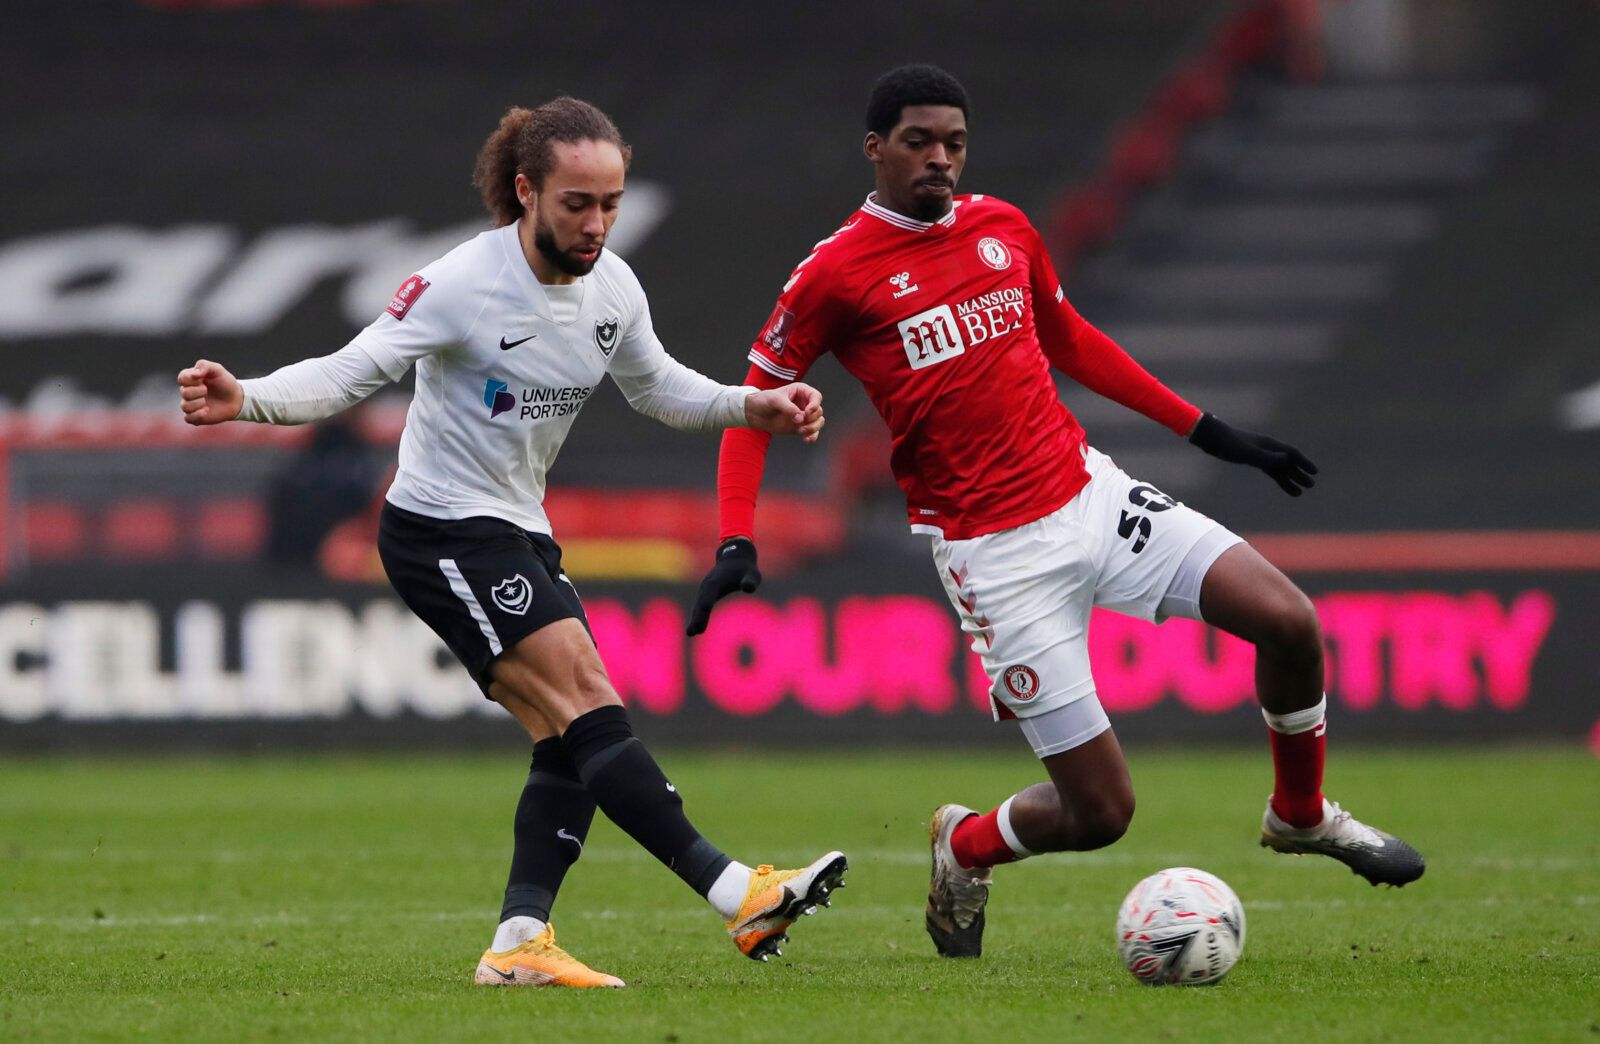 Soccer Football - FA Cup - Third Round - Bristol City v Portsmouth - Ashton Gate Stadium, Bristol, Britain - January 10, 2021 Portsmouths' Marcus Harness in action with Bristol City's Tyreeq Bakinson Action Images via Reuters/Andrew Couldridge